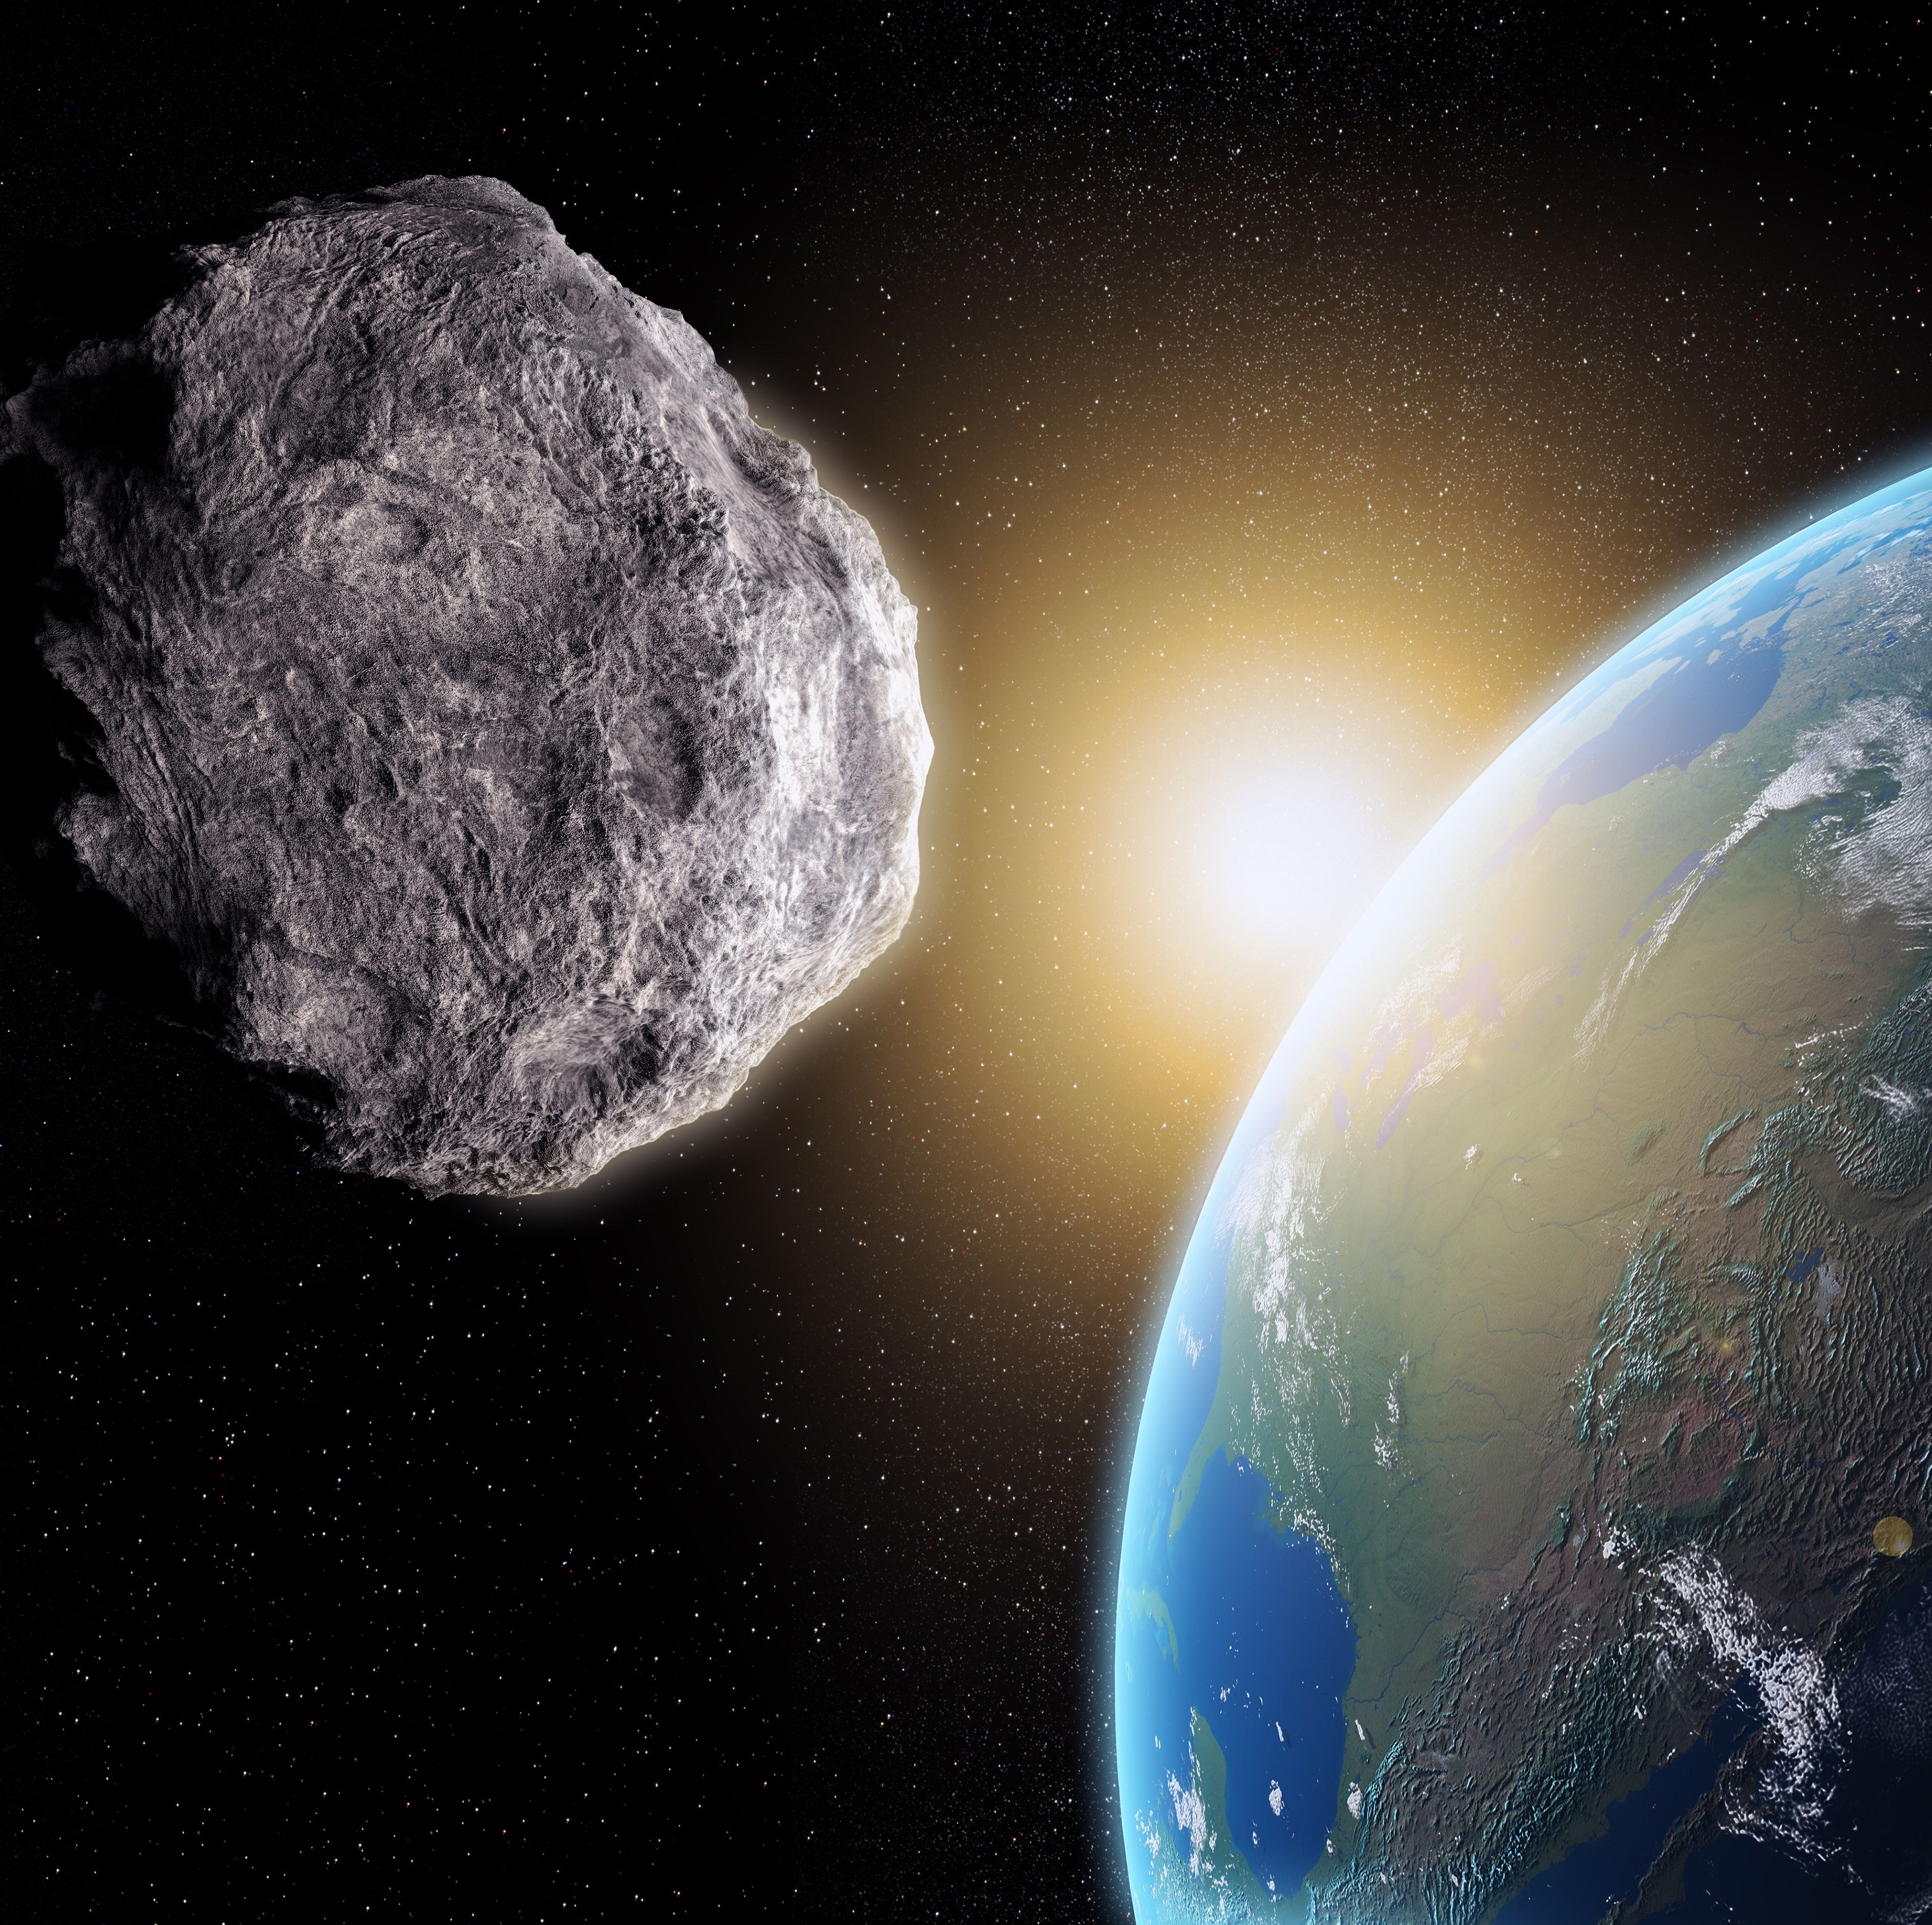 How To See the Massive, 'Potentially Hazardous' Asteroid Flying Past Earth Today